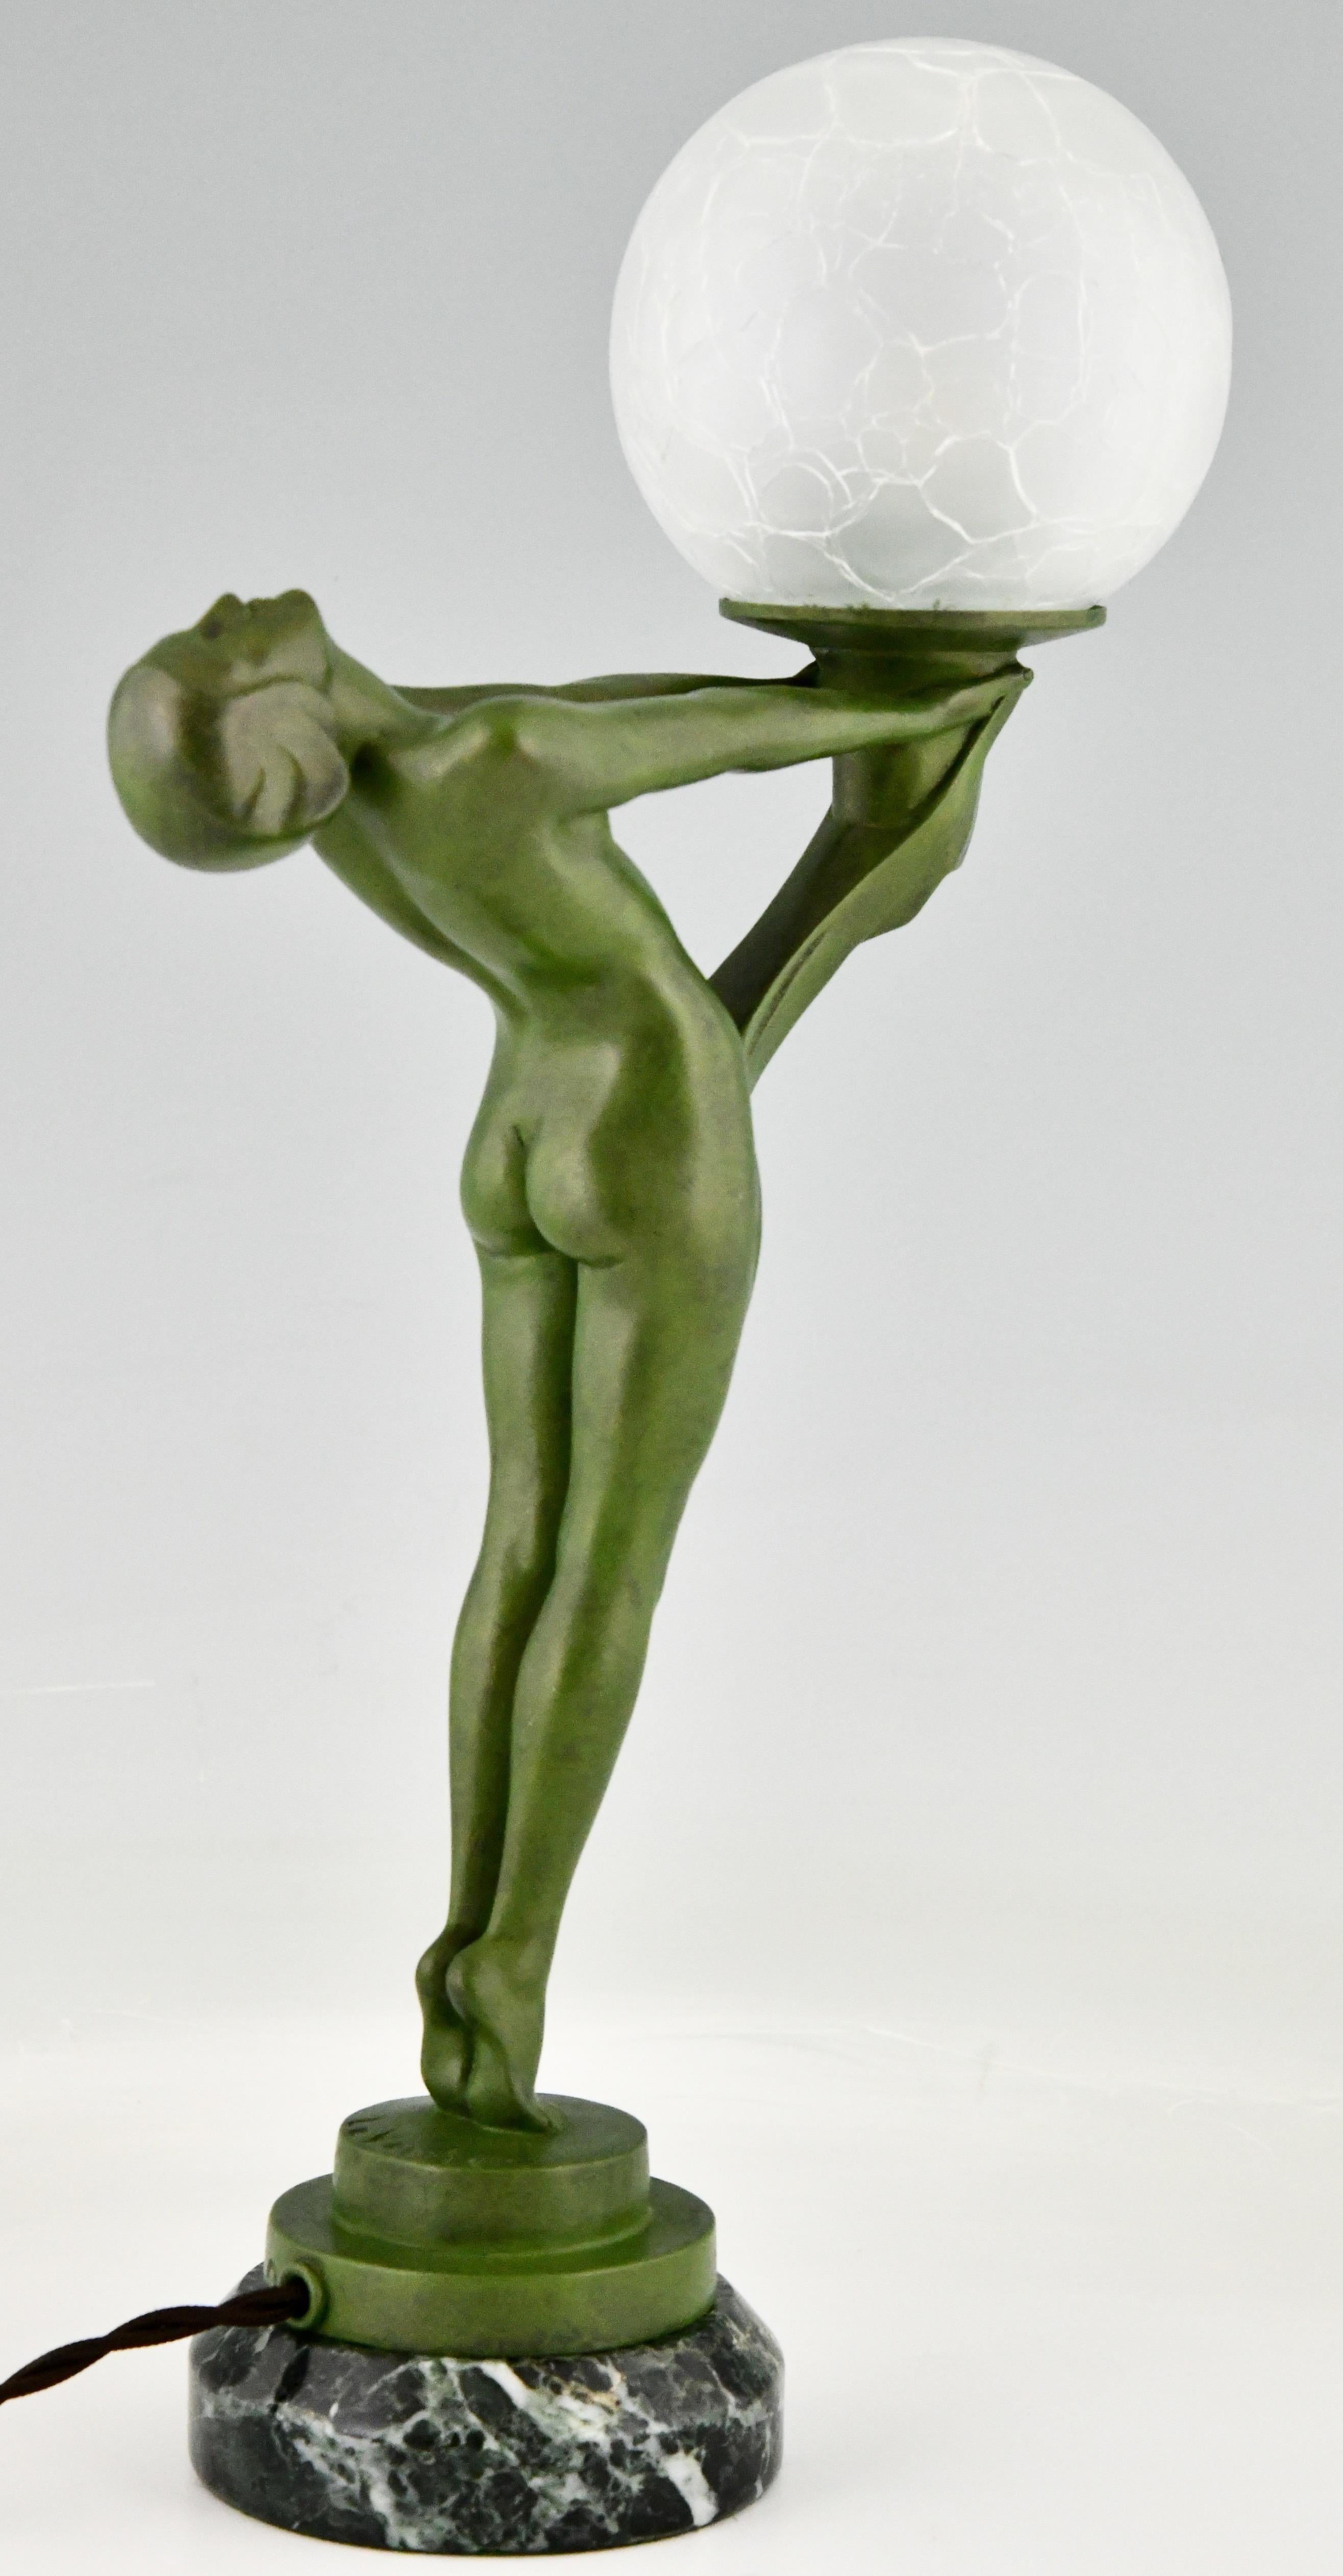 Mid-20th Century Art Deco Lamp Standing Nude with Ball Clarté by Max Le Verrier Original 1930